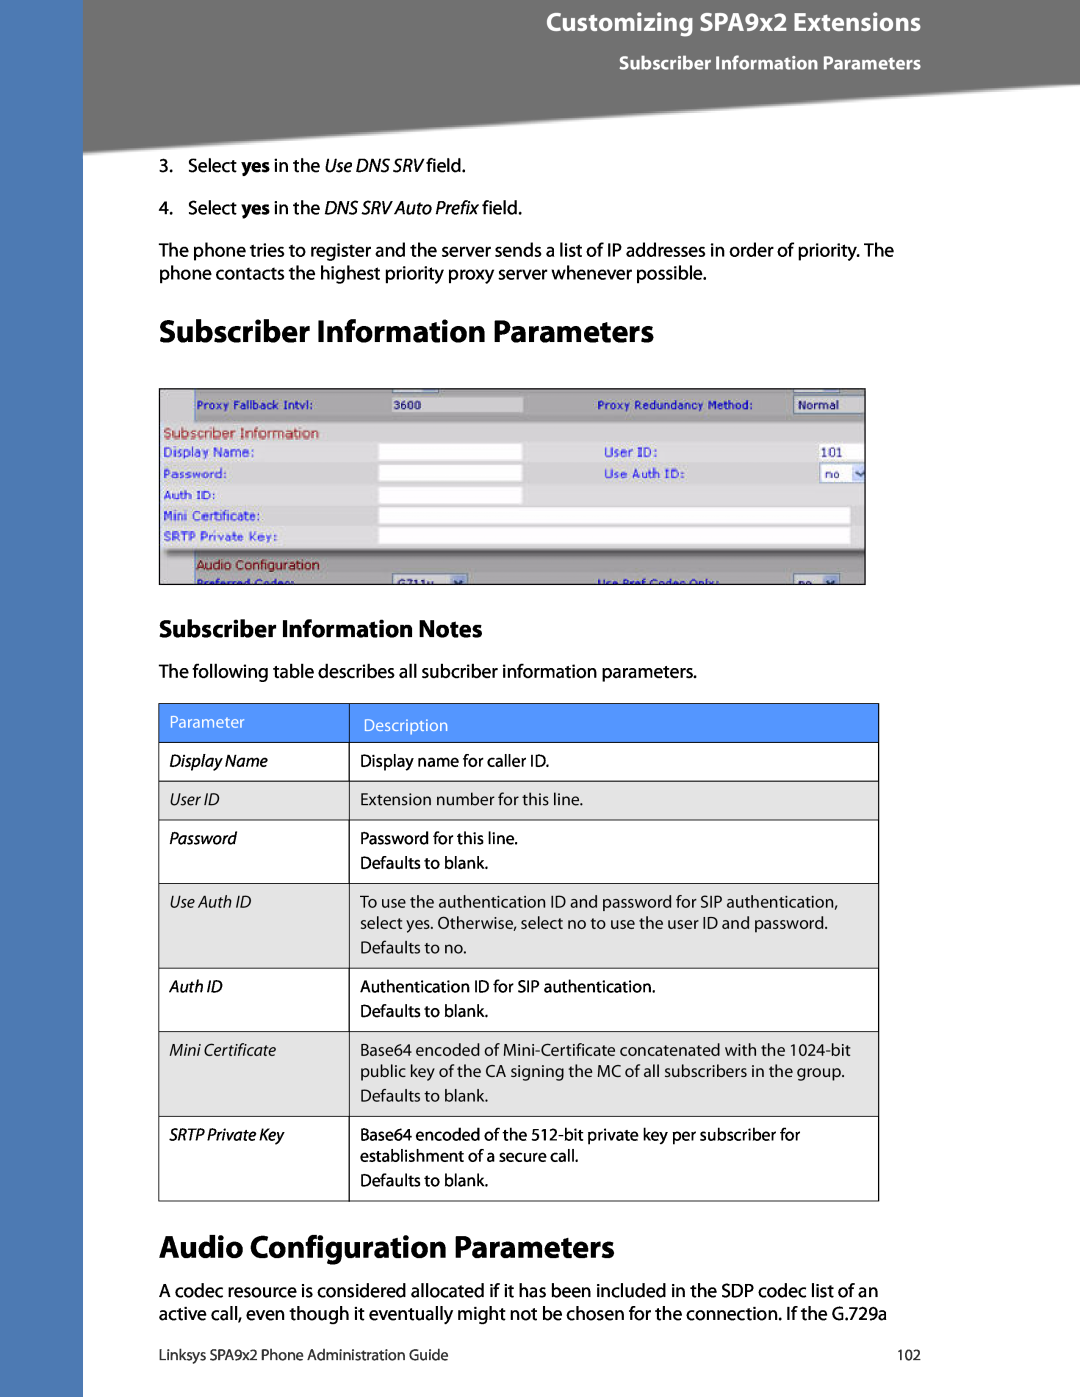 Linksys SPA942, SPA962 Subscriber Information Parameters, Audio Configuration Parameters, Subscriber Information Notes 